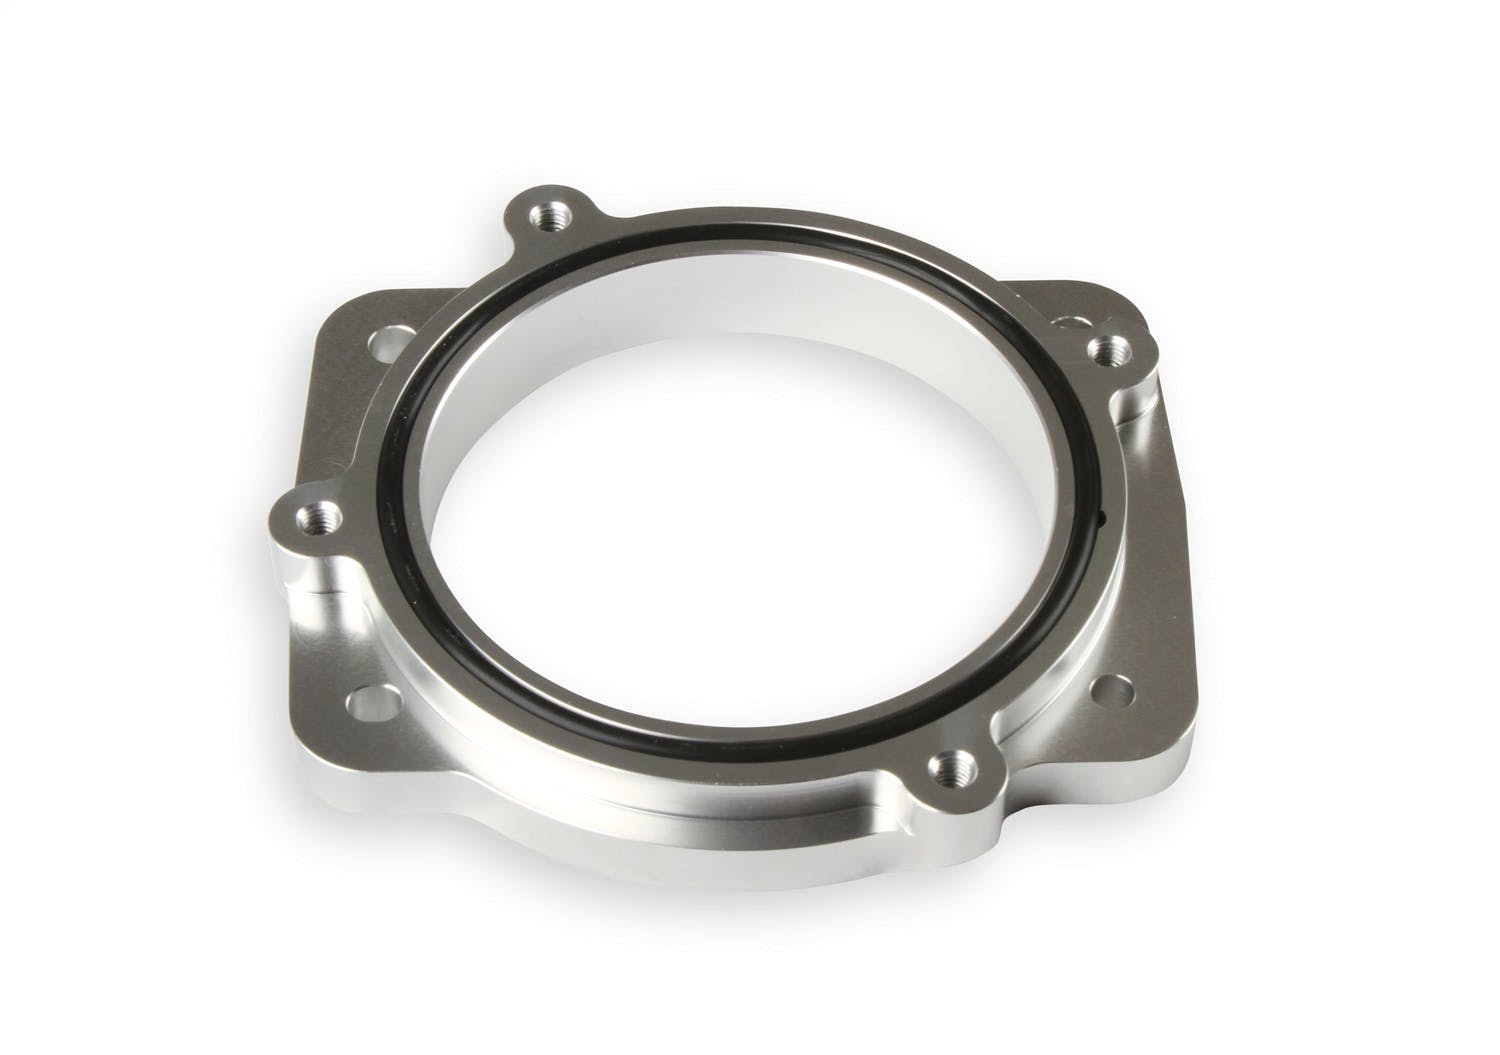 Holley EFI 300-661 Holley Throttle Body Adapter Kit